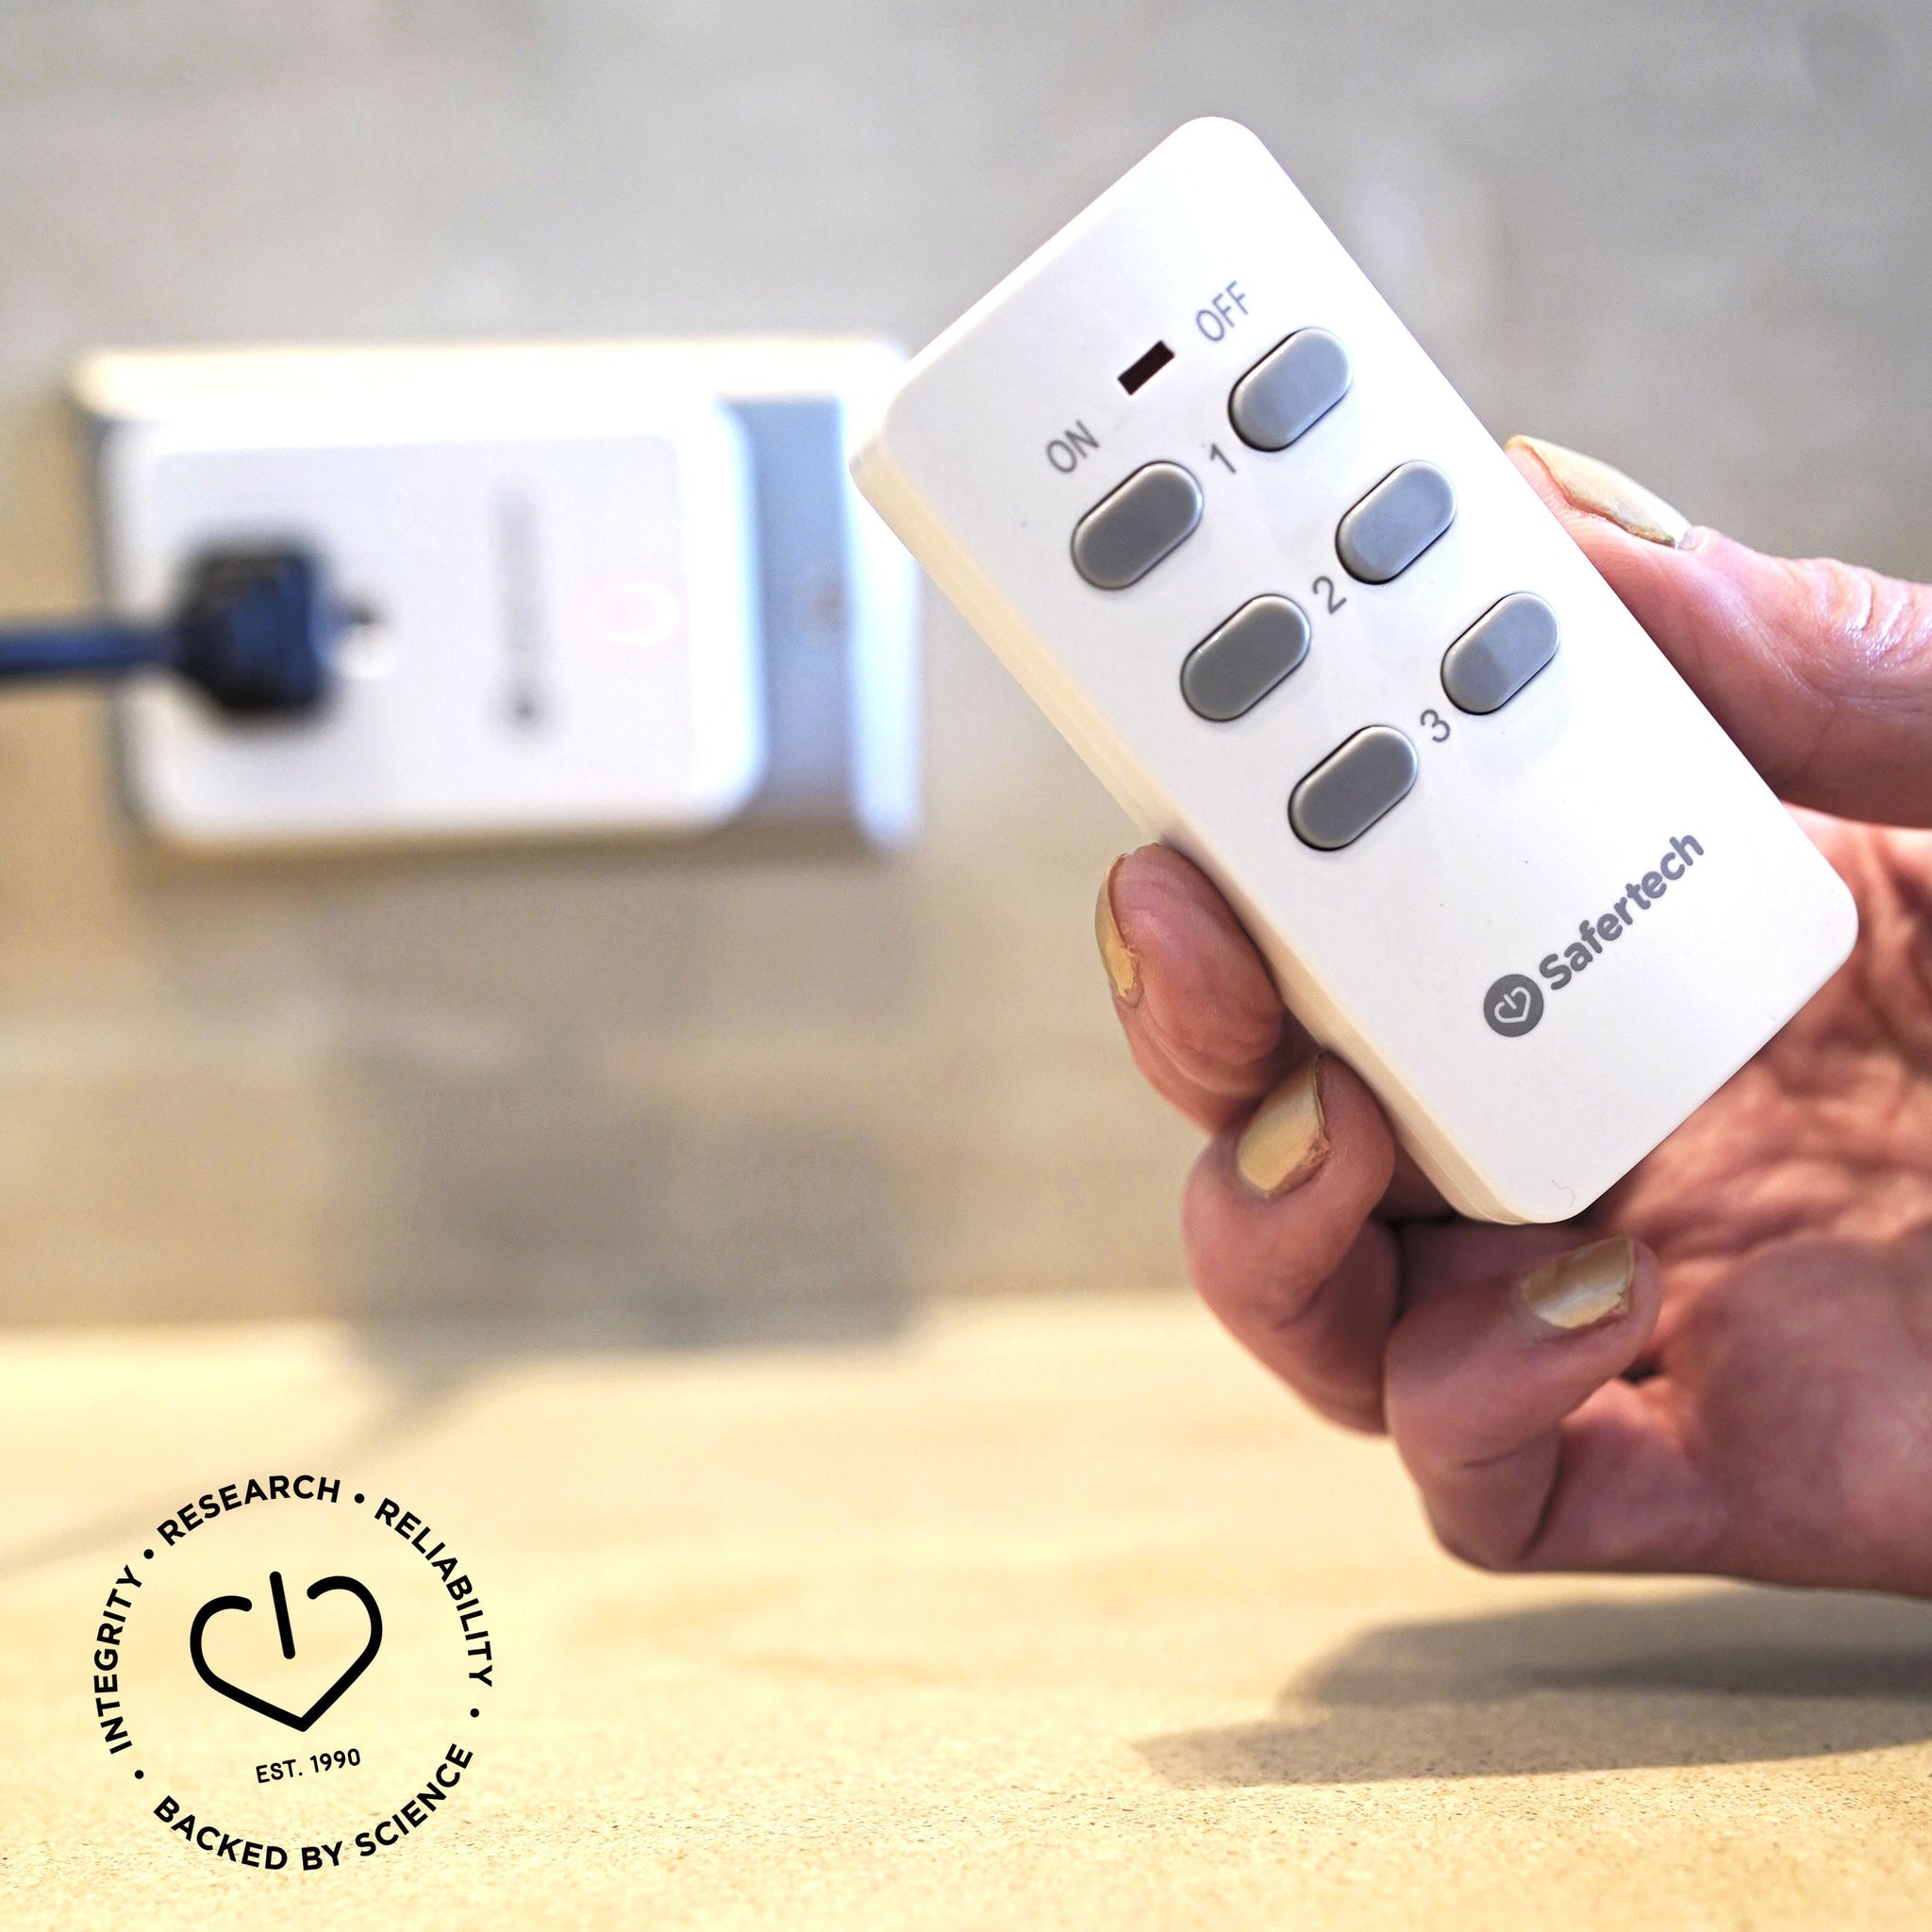 It's Easy To Turn WiFi Off! You'll love this inexpensive remote WiFi Kill  Switch – Tech Wellness